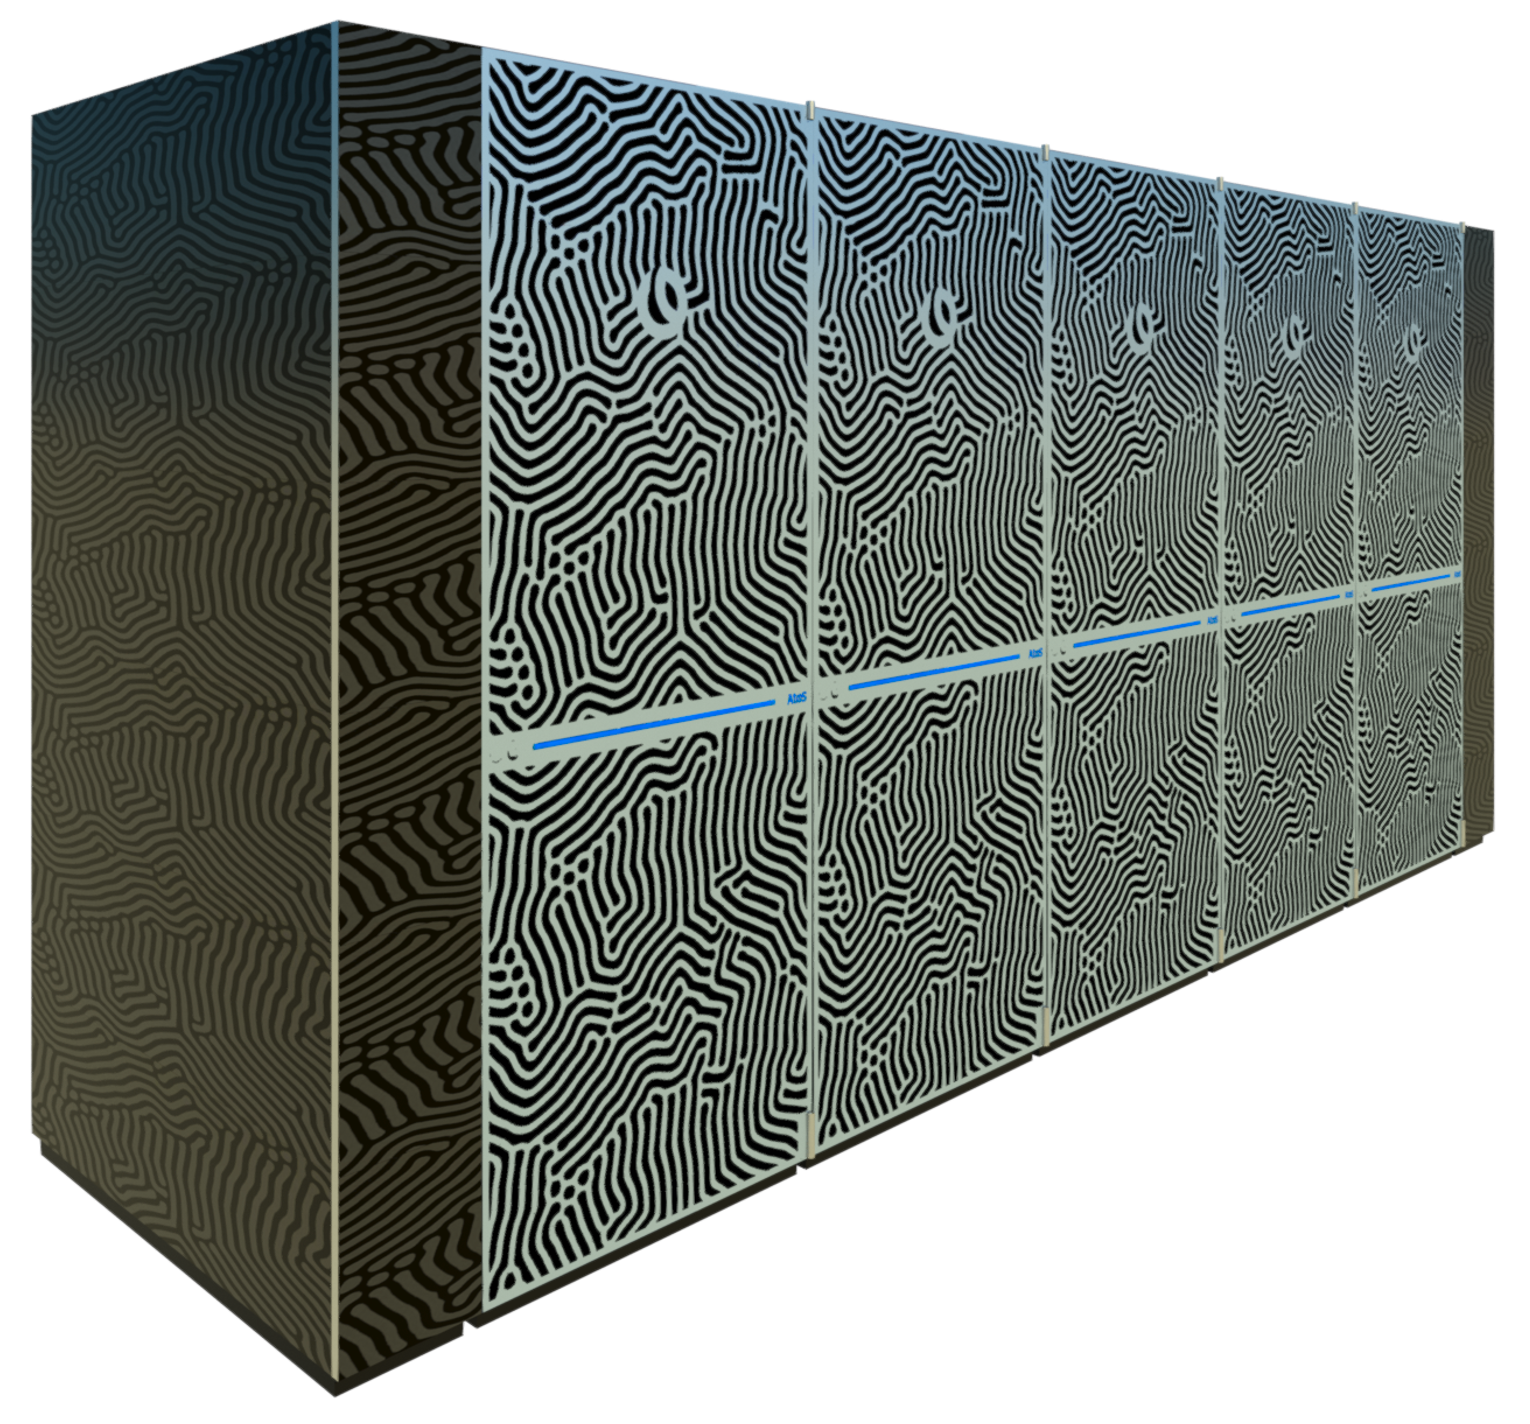 Revit 3D view of the BullSequana XH3000 supercomputer from Atos.